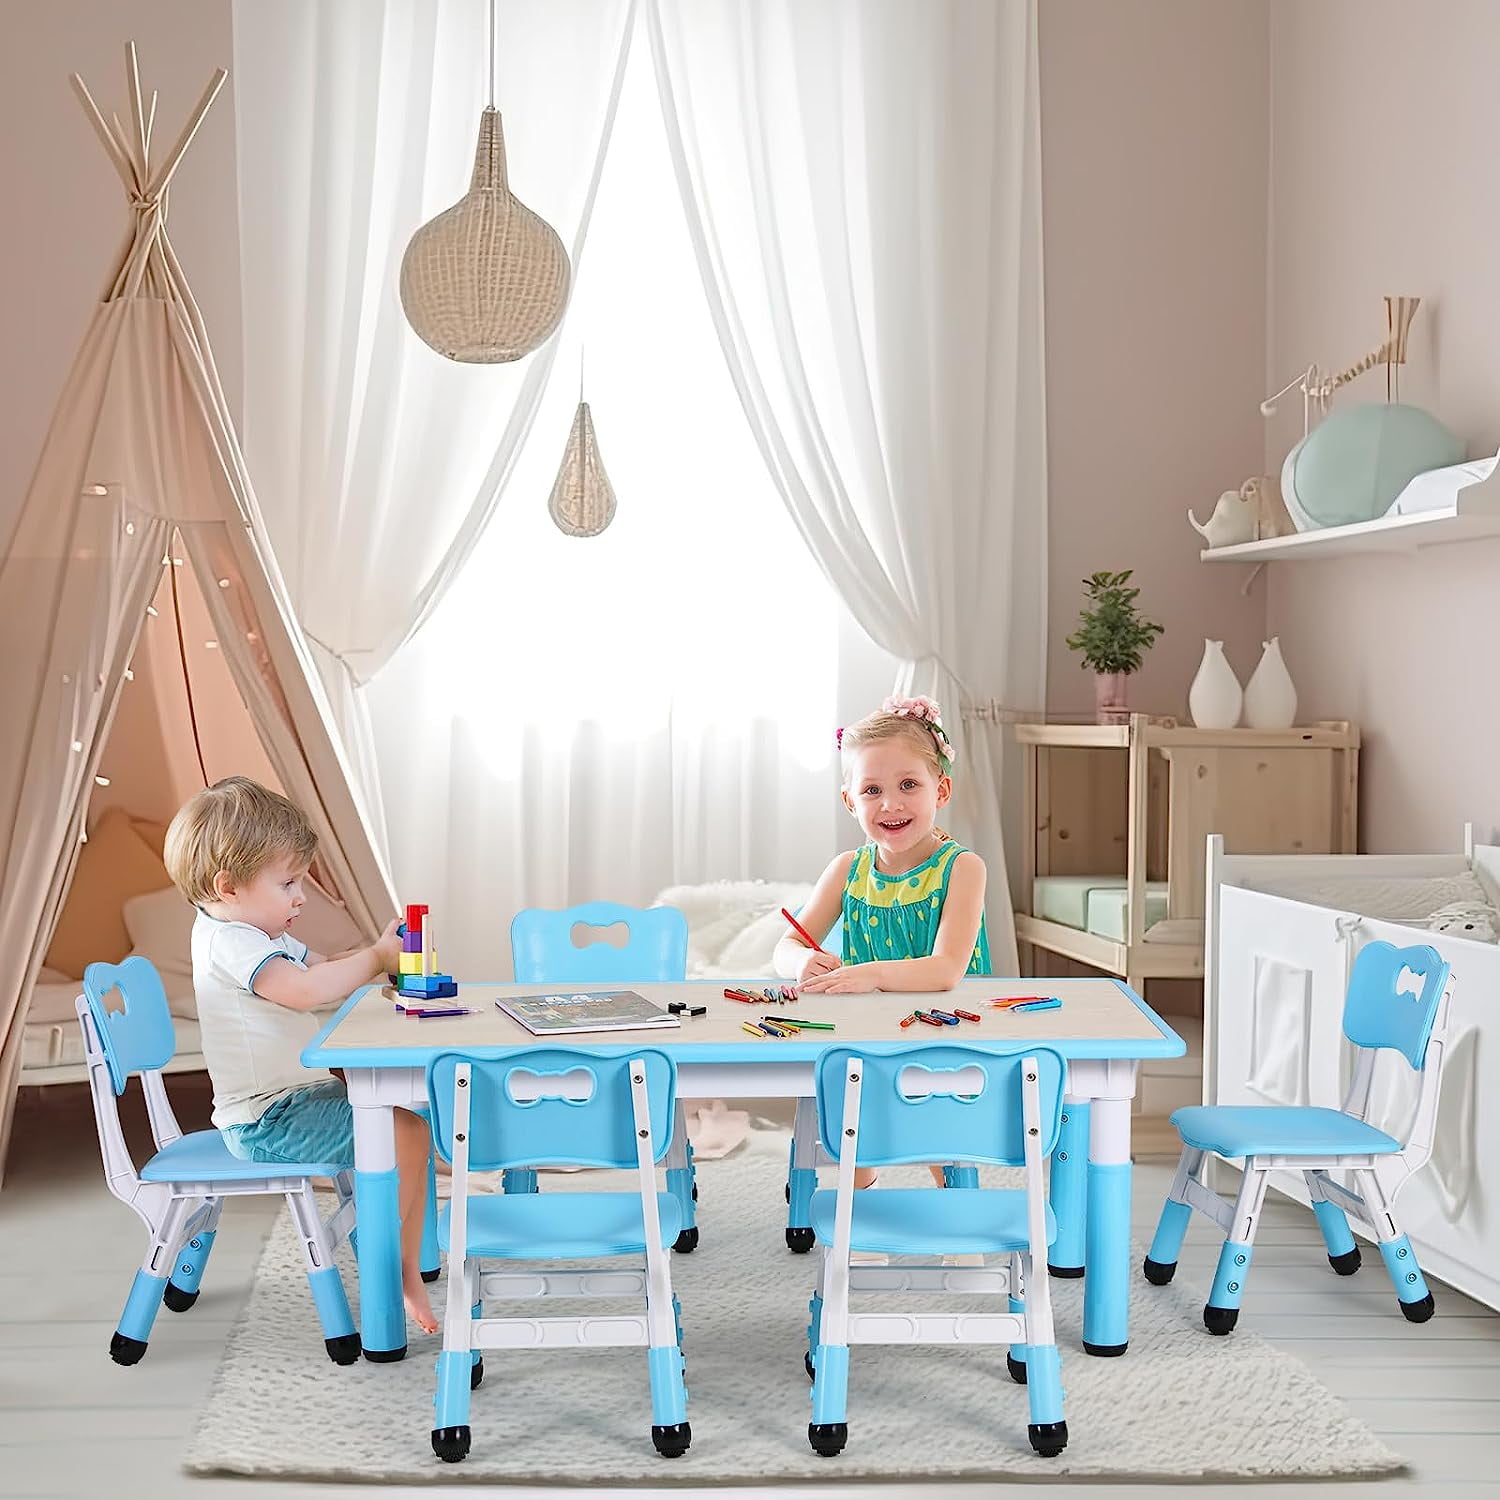 All Four, Six and Eight Seat Toddler Tables Options, Preschool & Daycare  Furniture